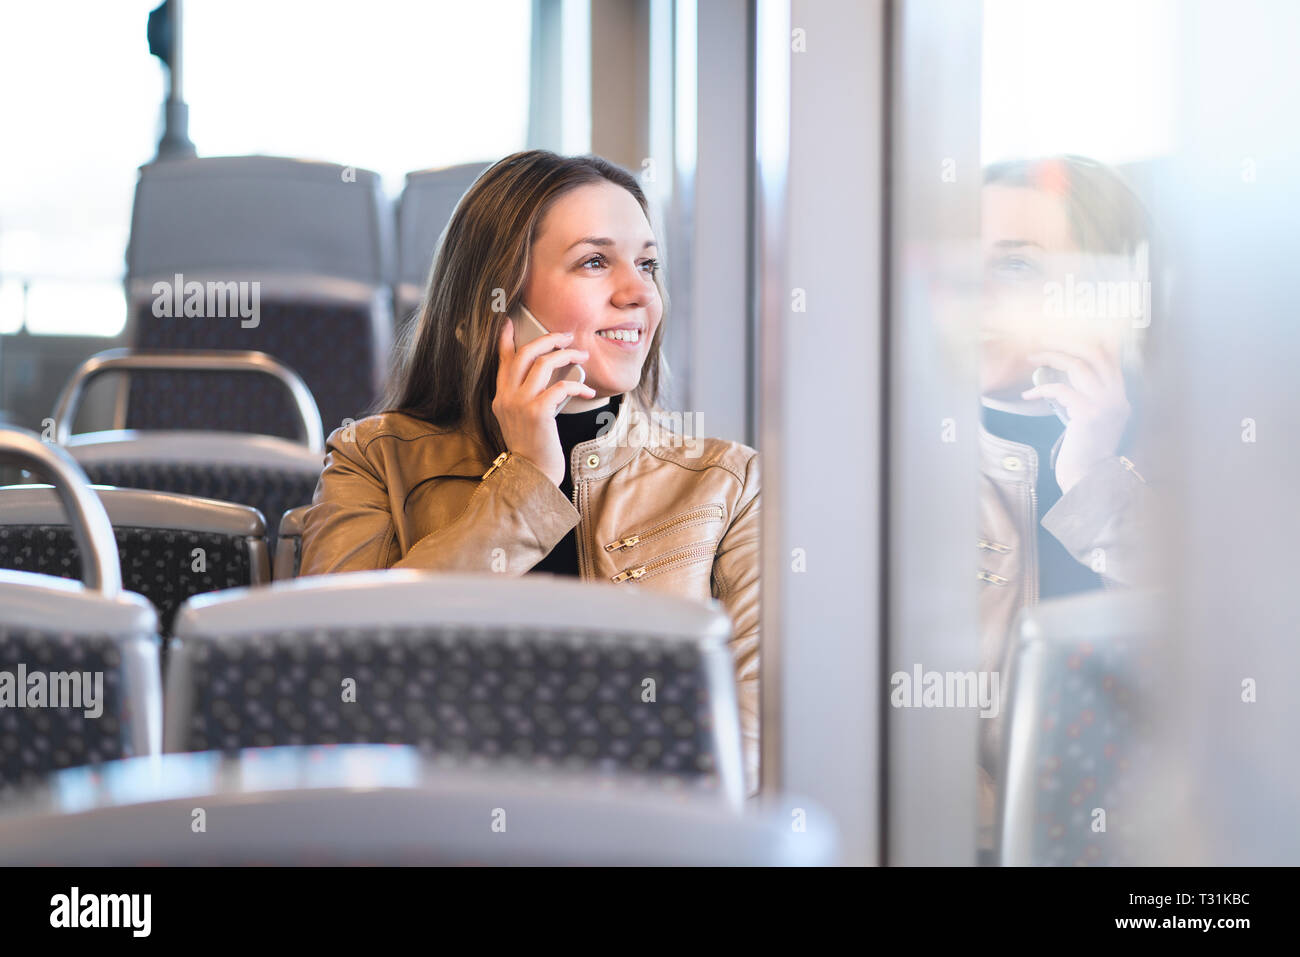 Woman talking on the phone while riding the bus, train, metro or subway. Happy lady with smartphone in public transportation looking out the window. Stock Photo